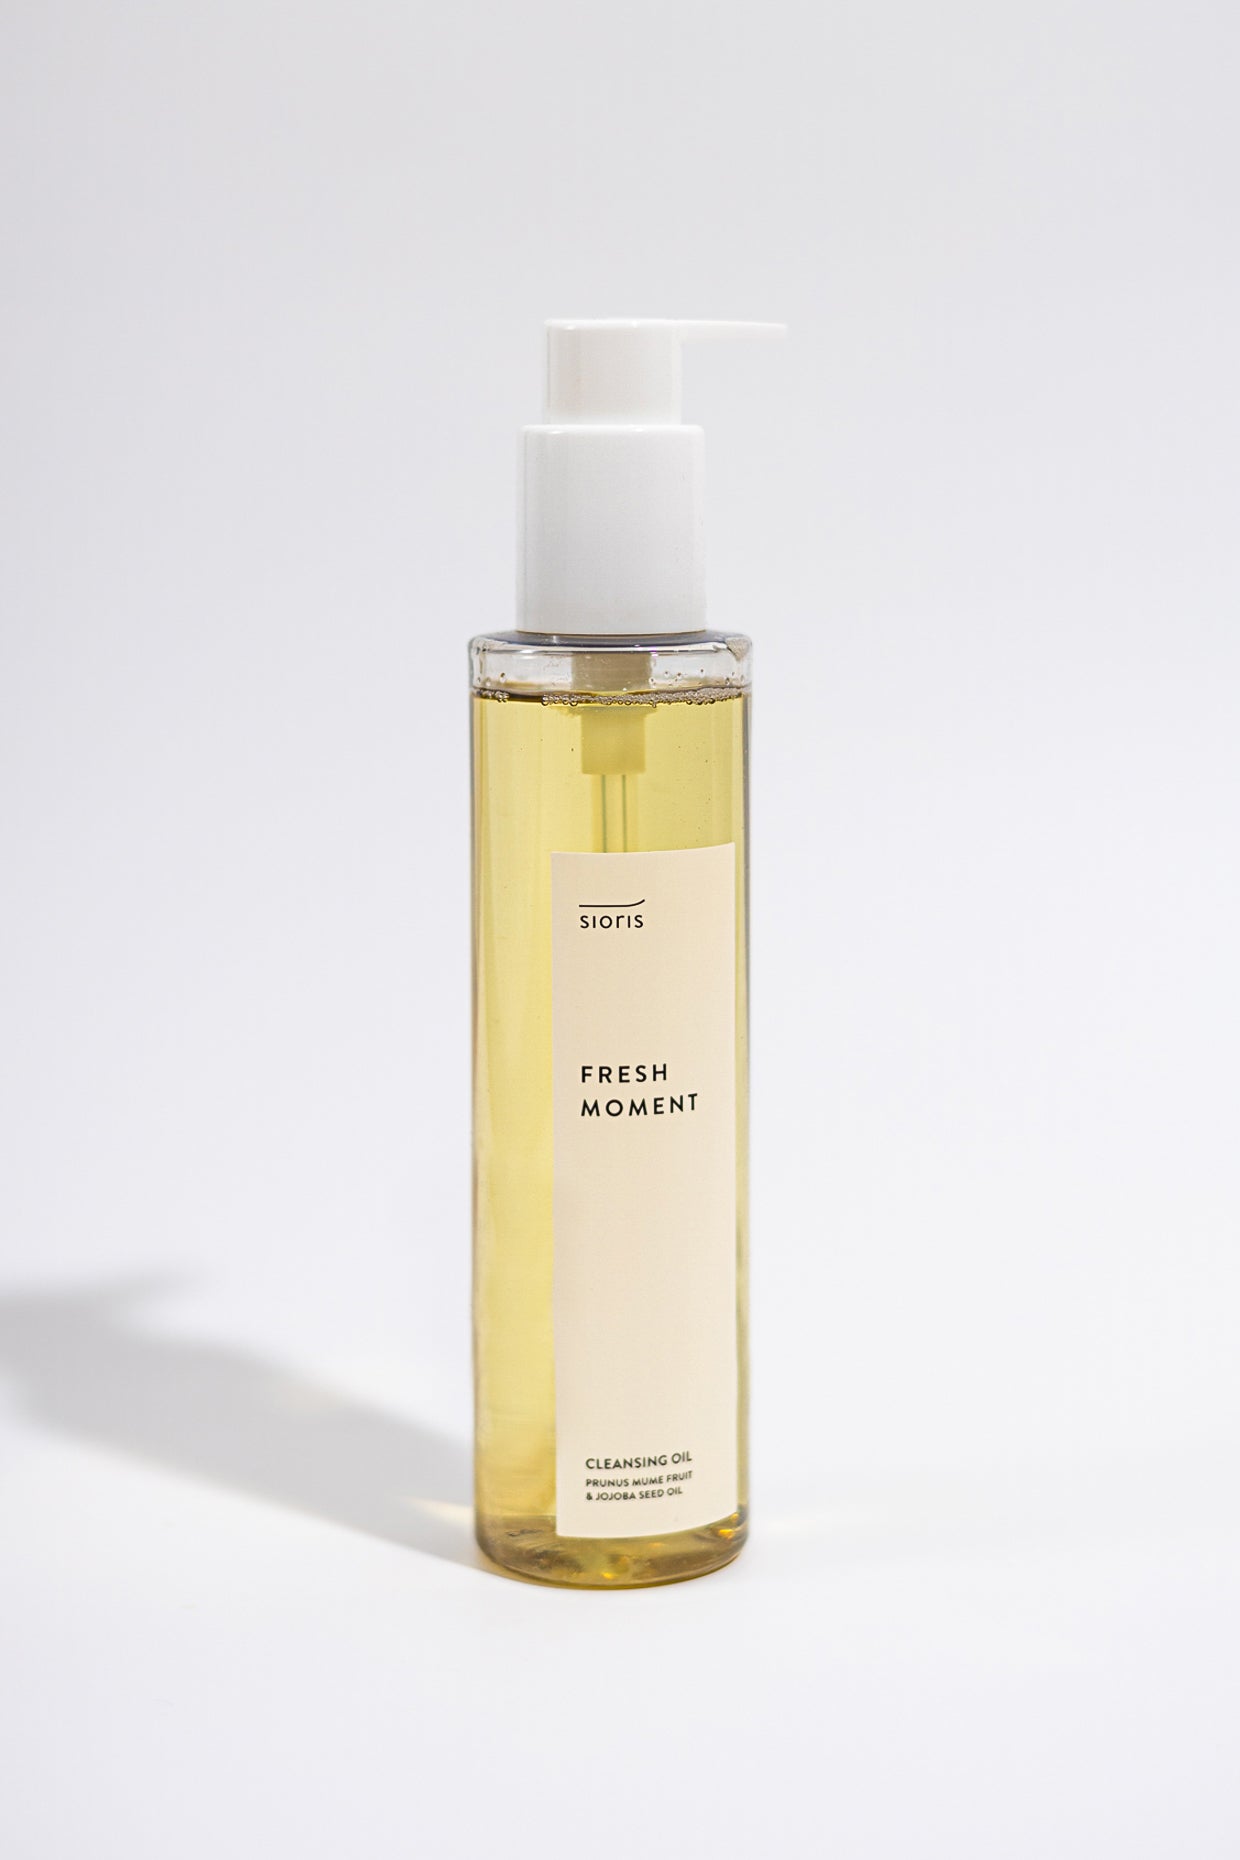 Sioris Fresh Moment Cleansing Oil